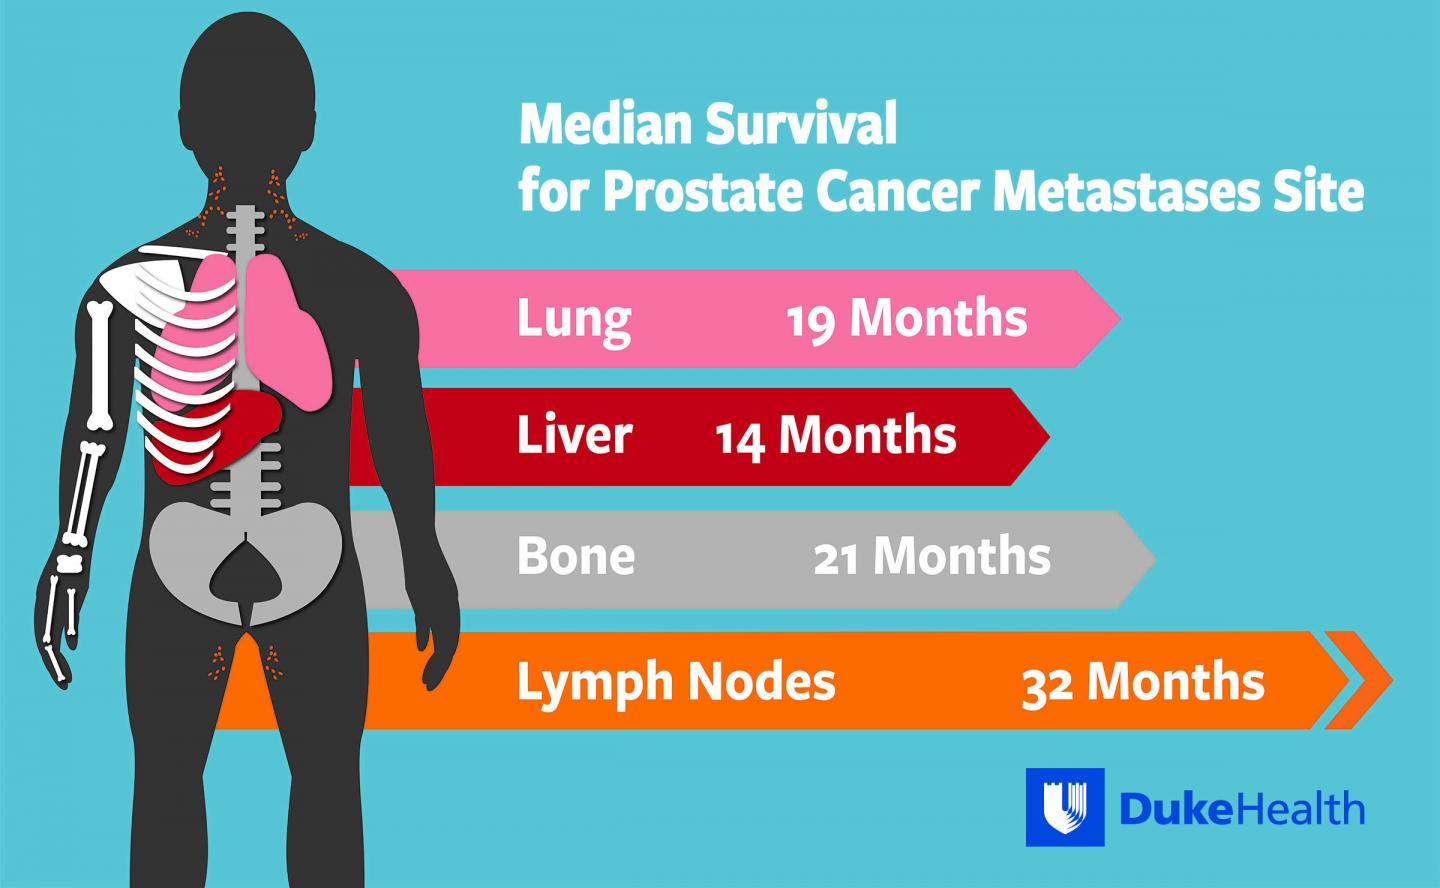 Where prostate cancer spreads in the body affects survival ...